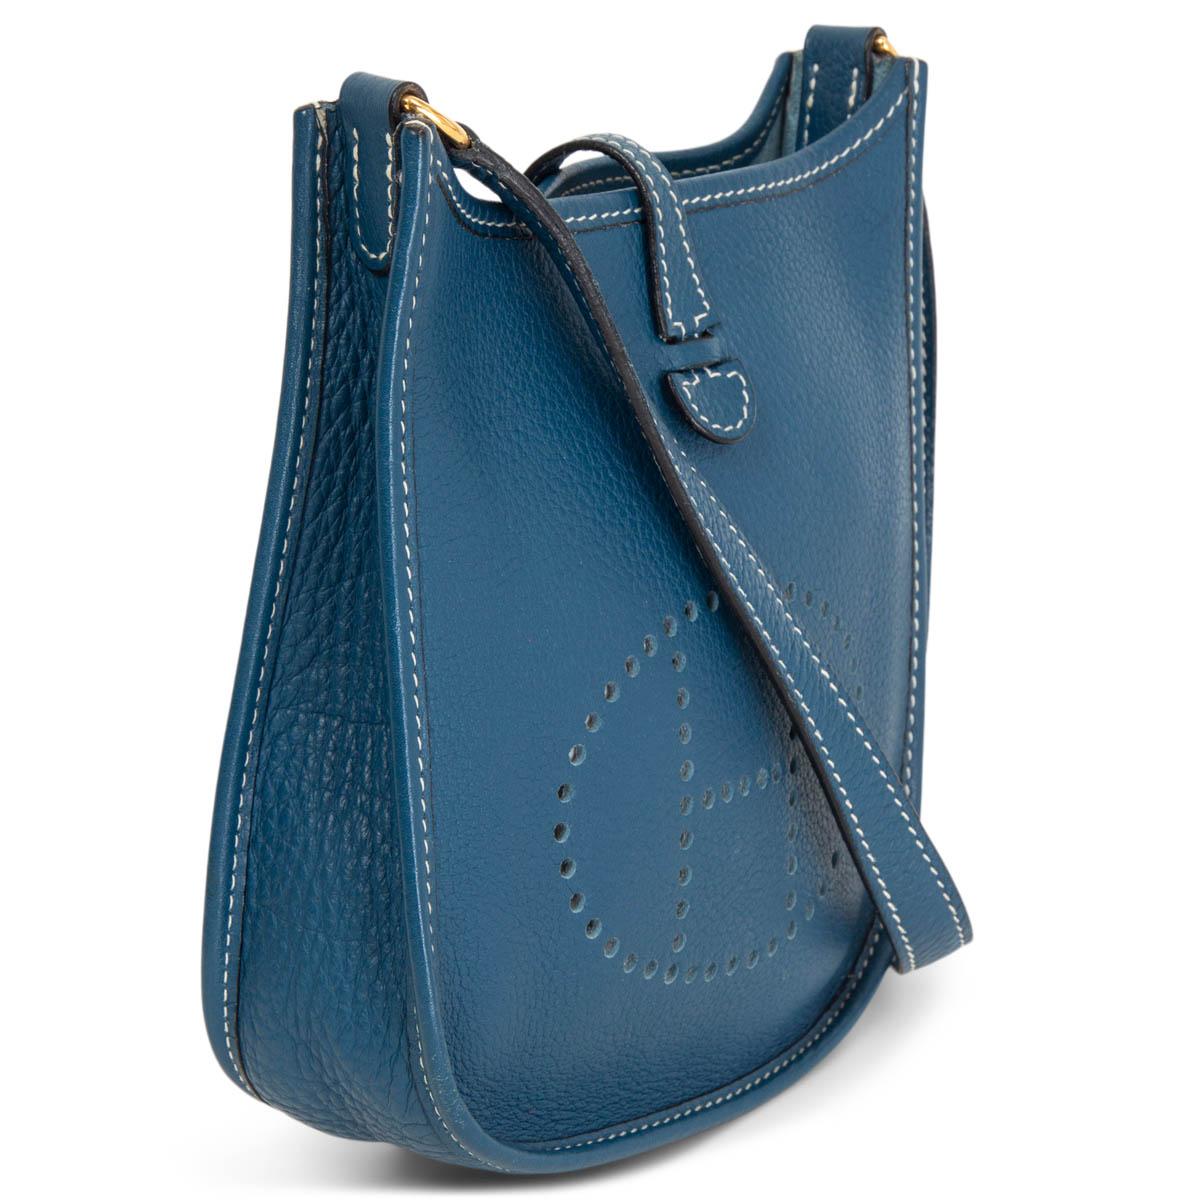 100% authentic Hermès Evelyne 16 crossbody bag in Thalassa (blue) Taurillon Clemence leather with contrasting white stitching and matching leather strap, perforated leather 